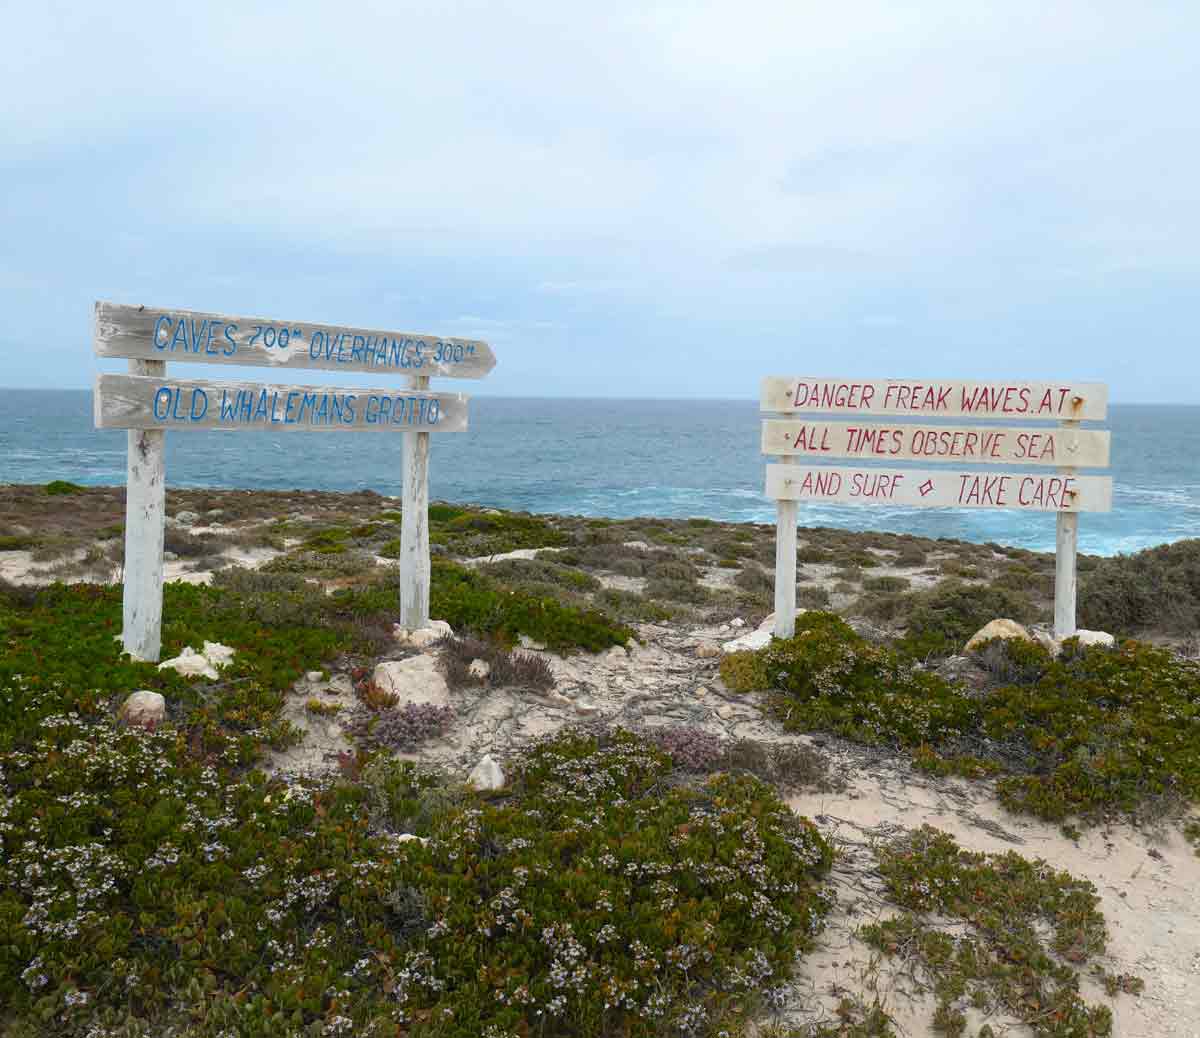 View of danger signs at Old Whaleman's Grotto. Located in Whaler's Way Sanctuary, Eyre Peninsula, South Australia.